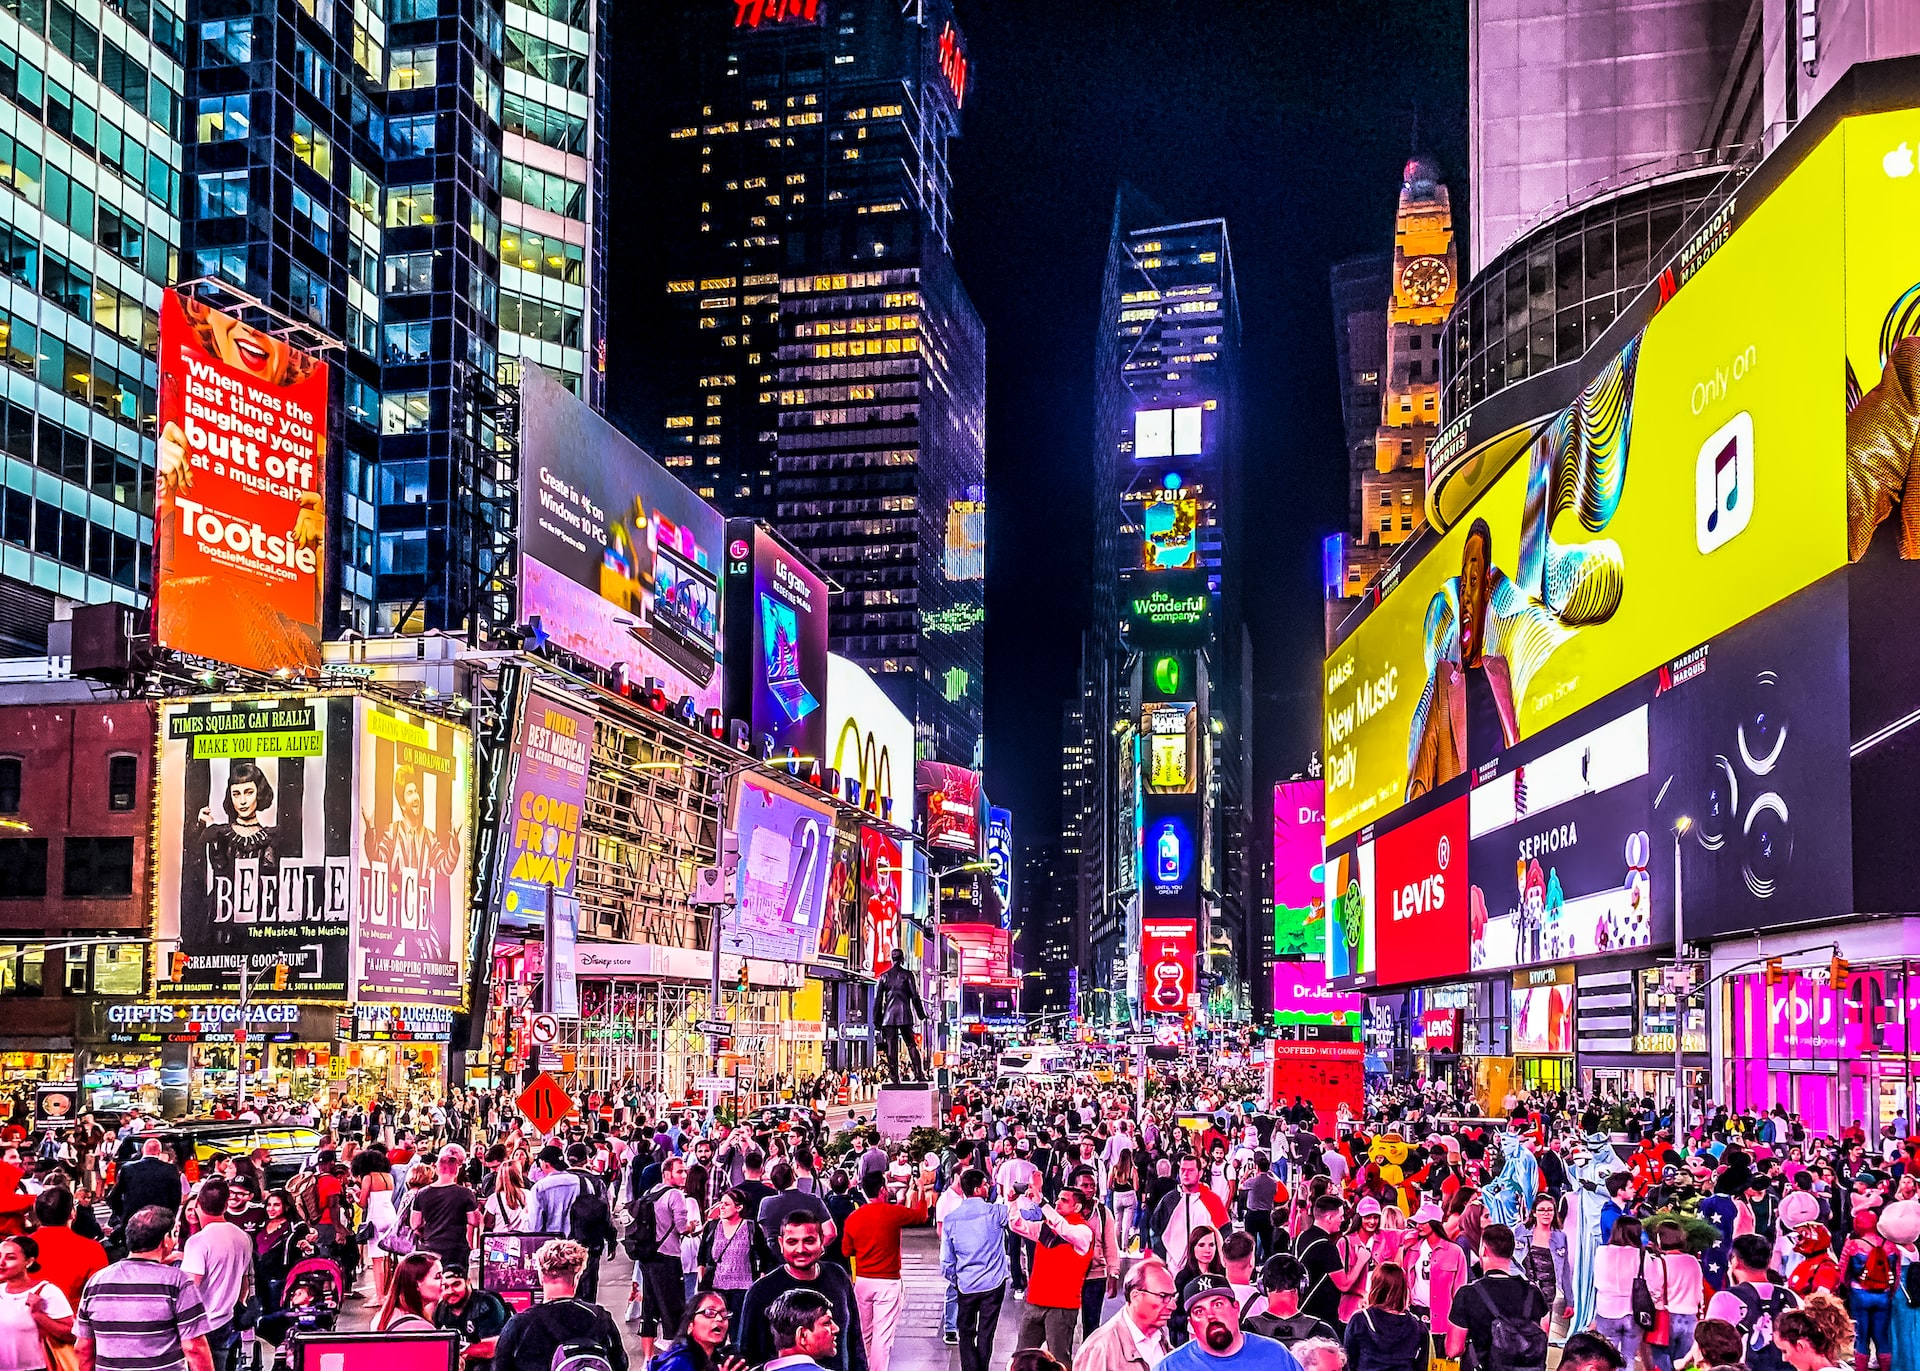 The New York Times Square at night teeming with people and illuminated billboard signs